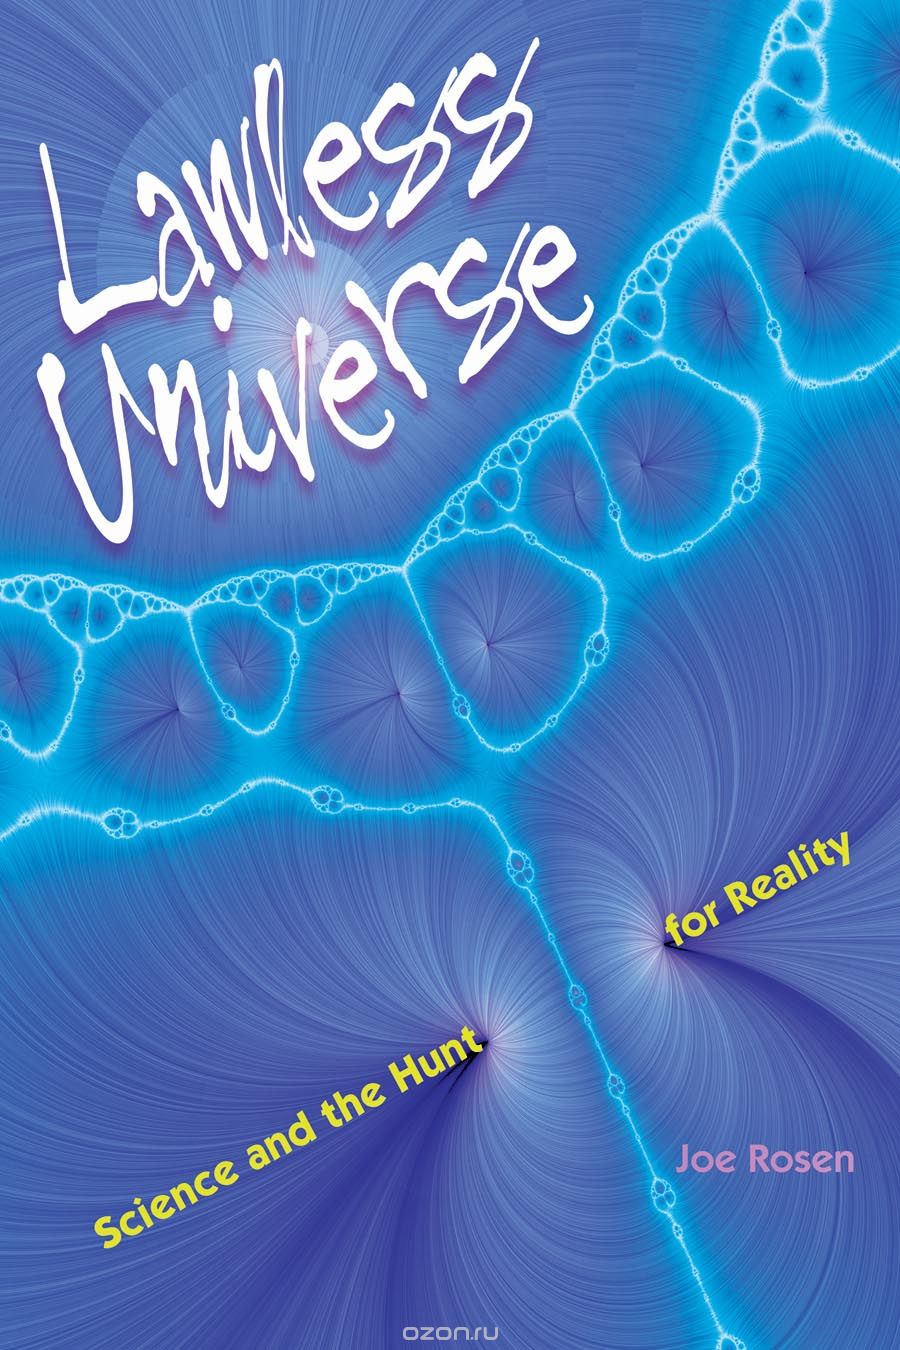 Lawless Universe – Science and the Hunt for Reality